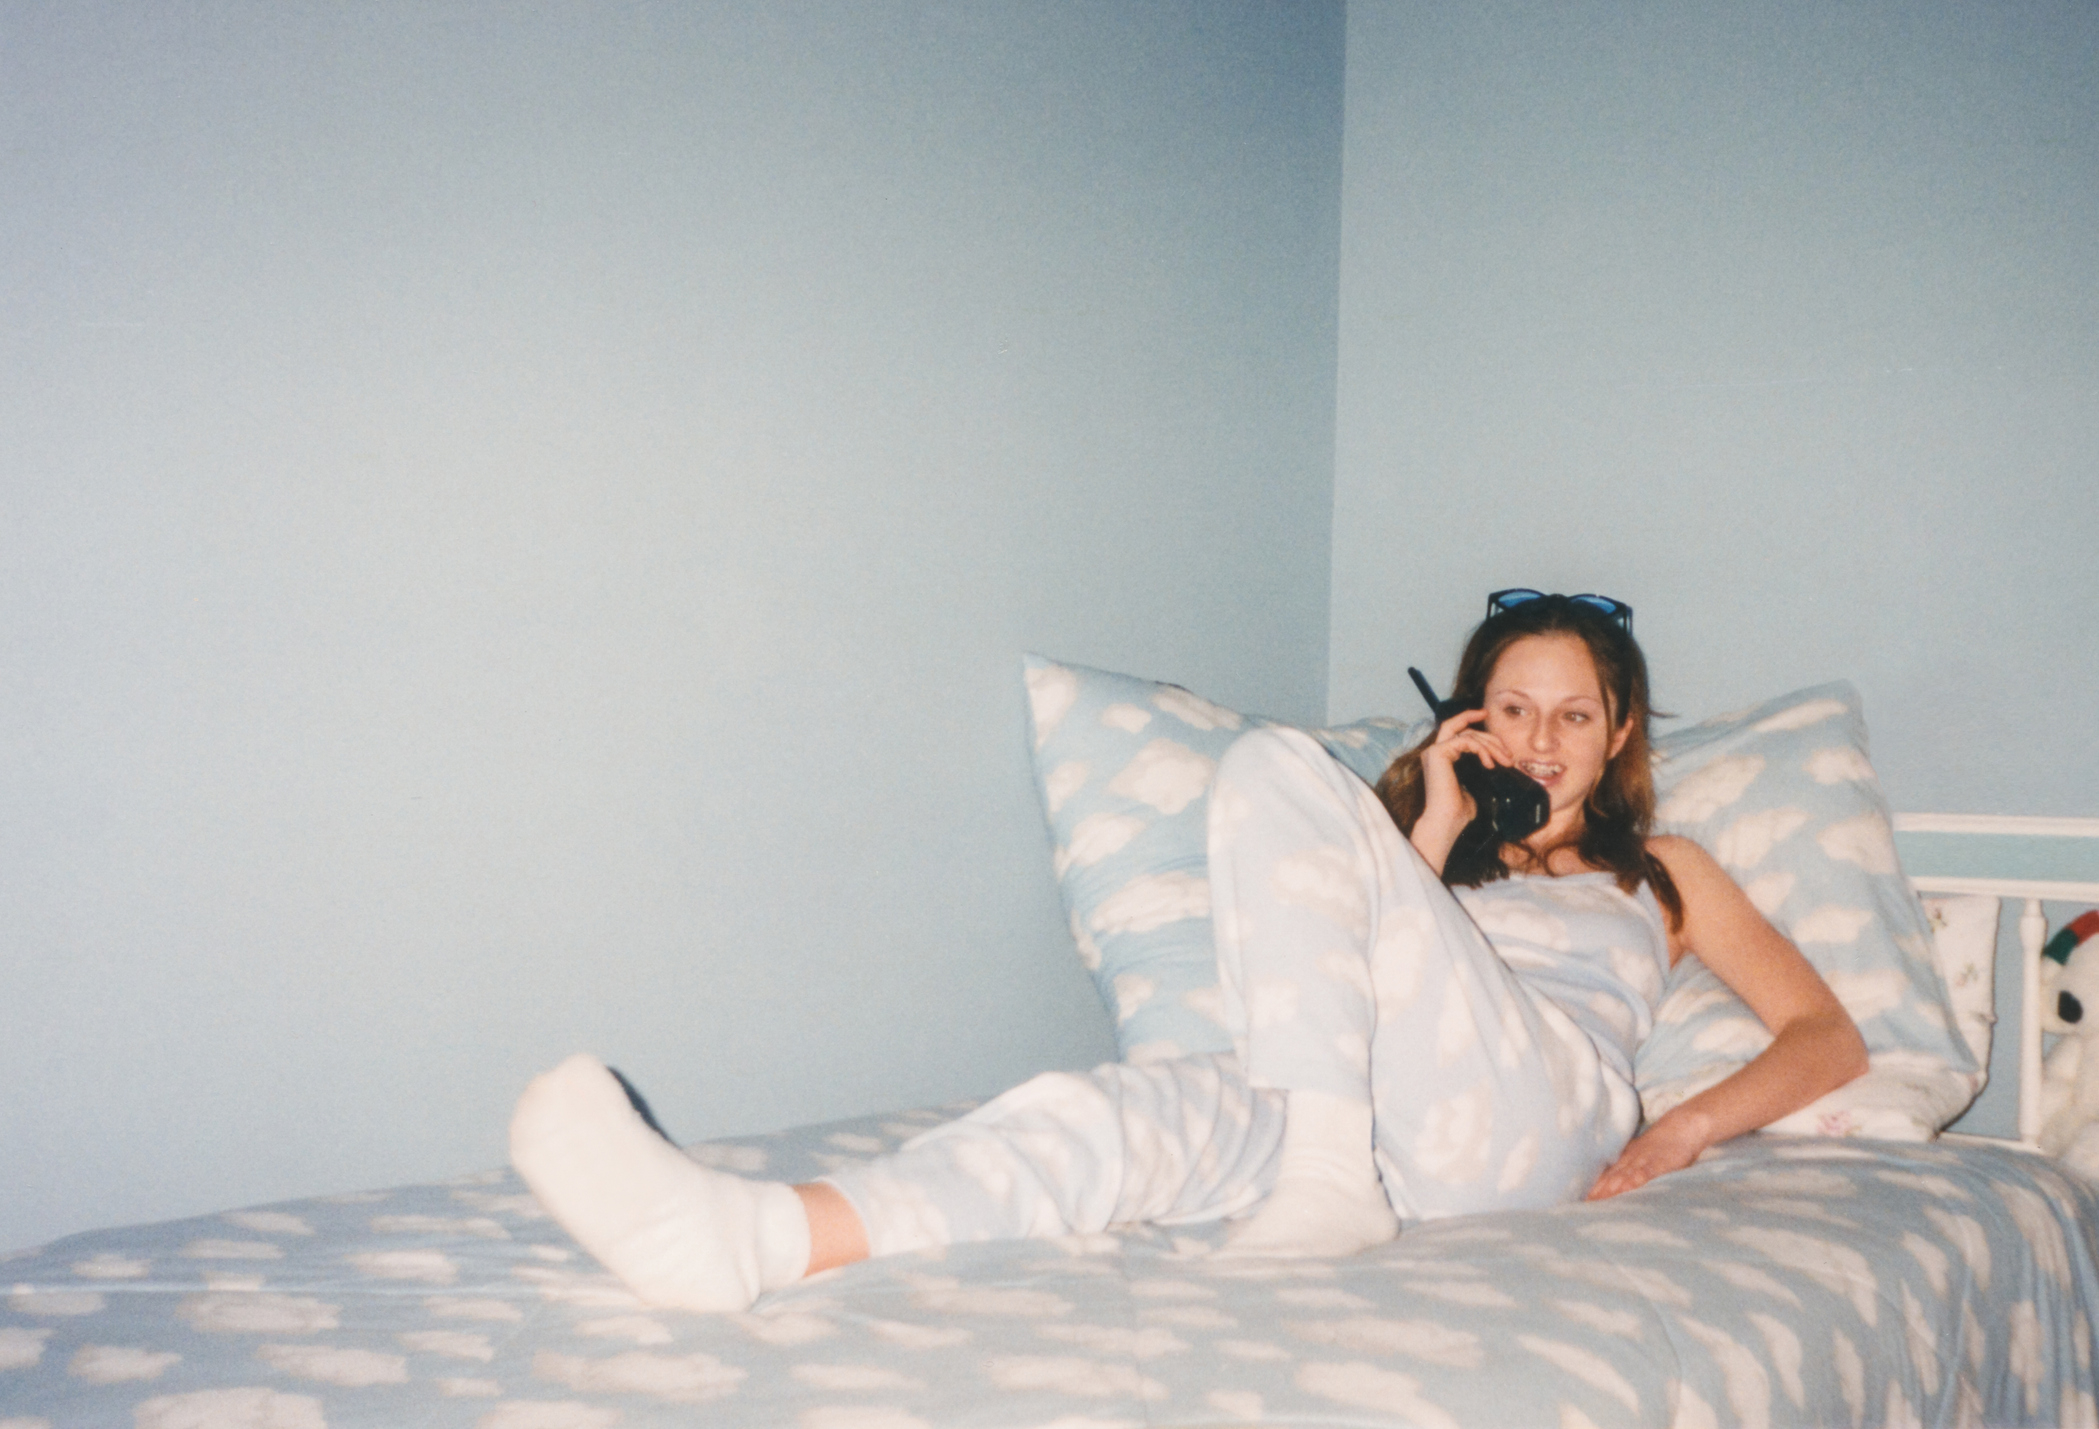 Person relaxing on bed with patterned sheets, talking on a corded phone, evoking a retro vibe